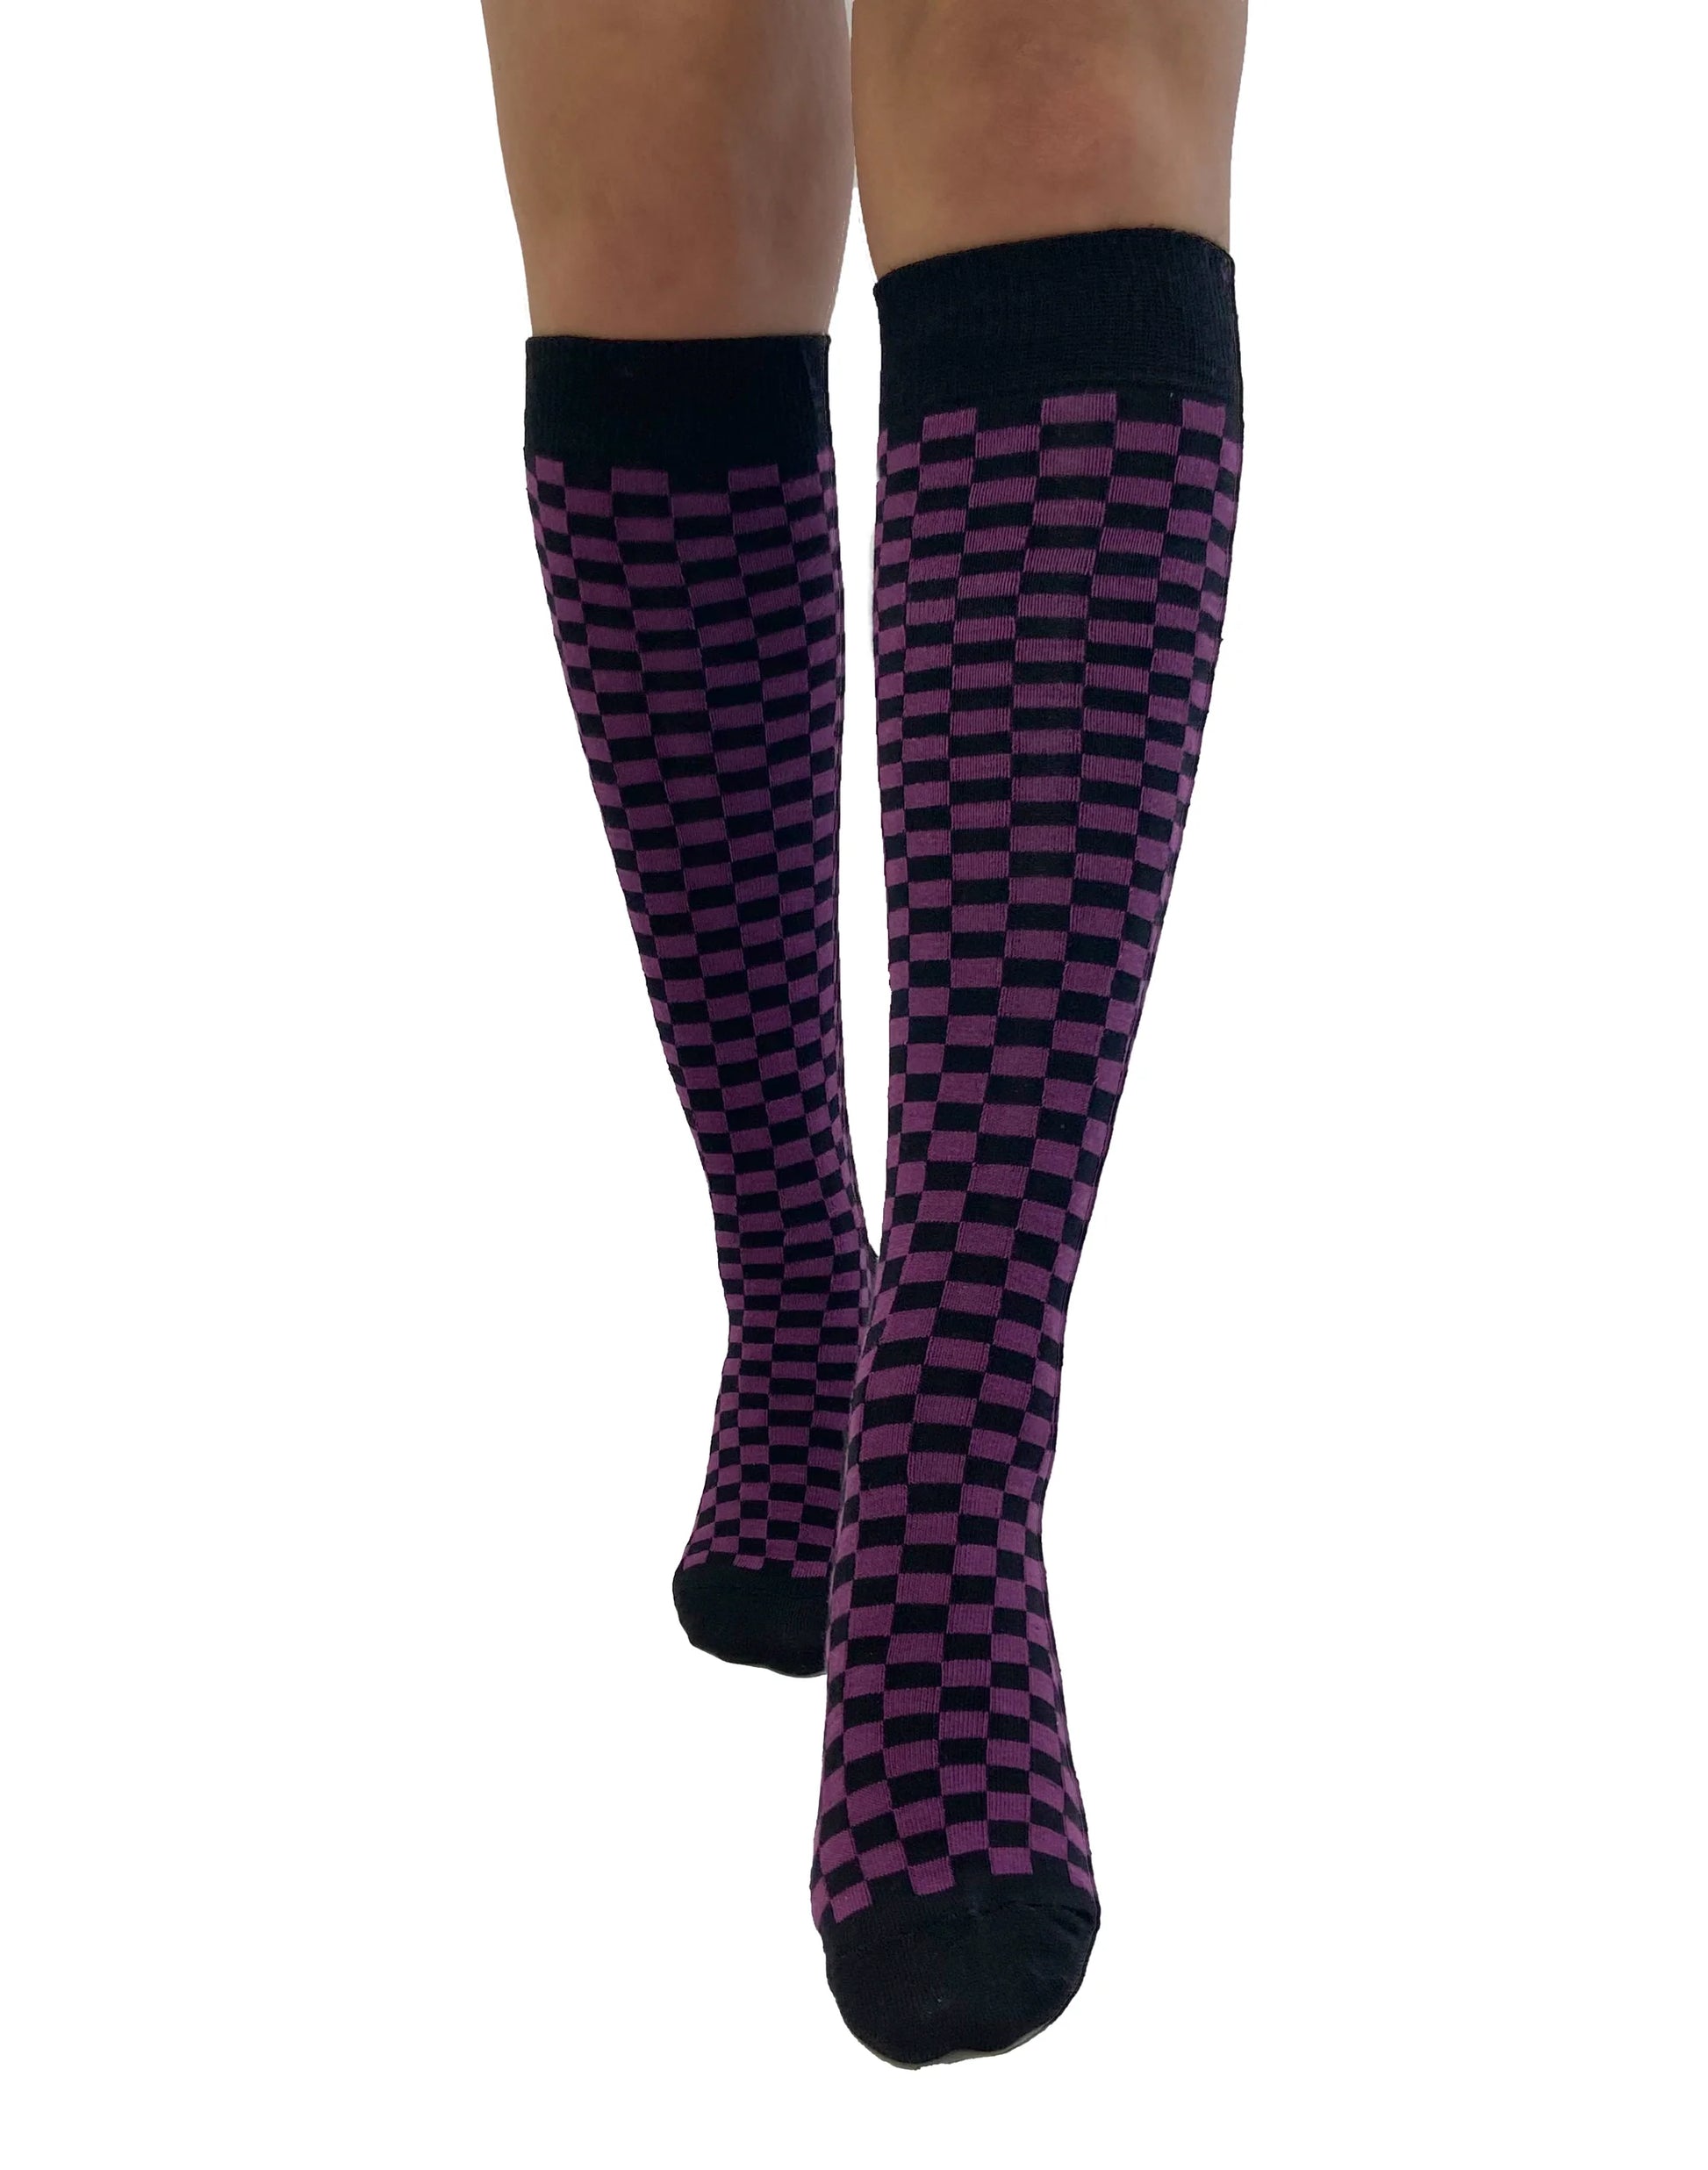 Pamela Mann Checkered Knee-Highs - Black and purple checkered square patterned knee-high cotton socks with black cuff, toe and heel.